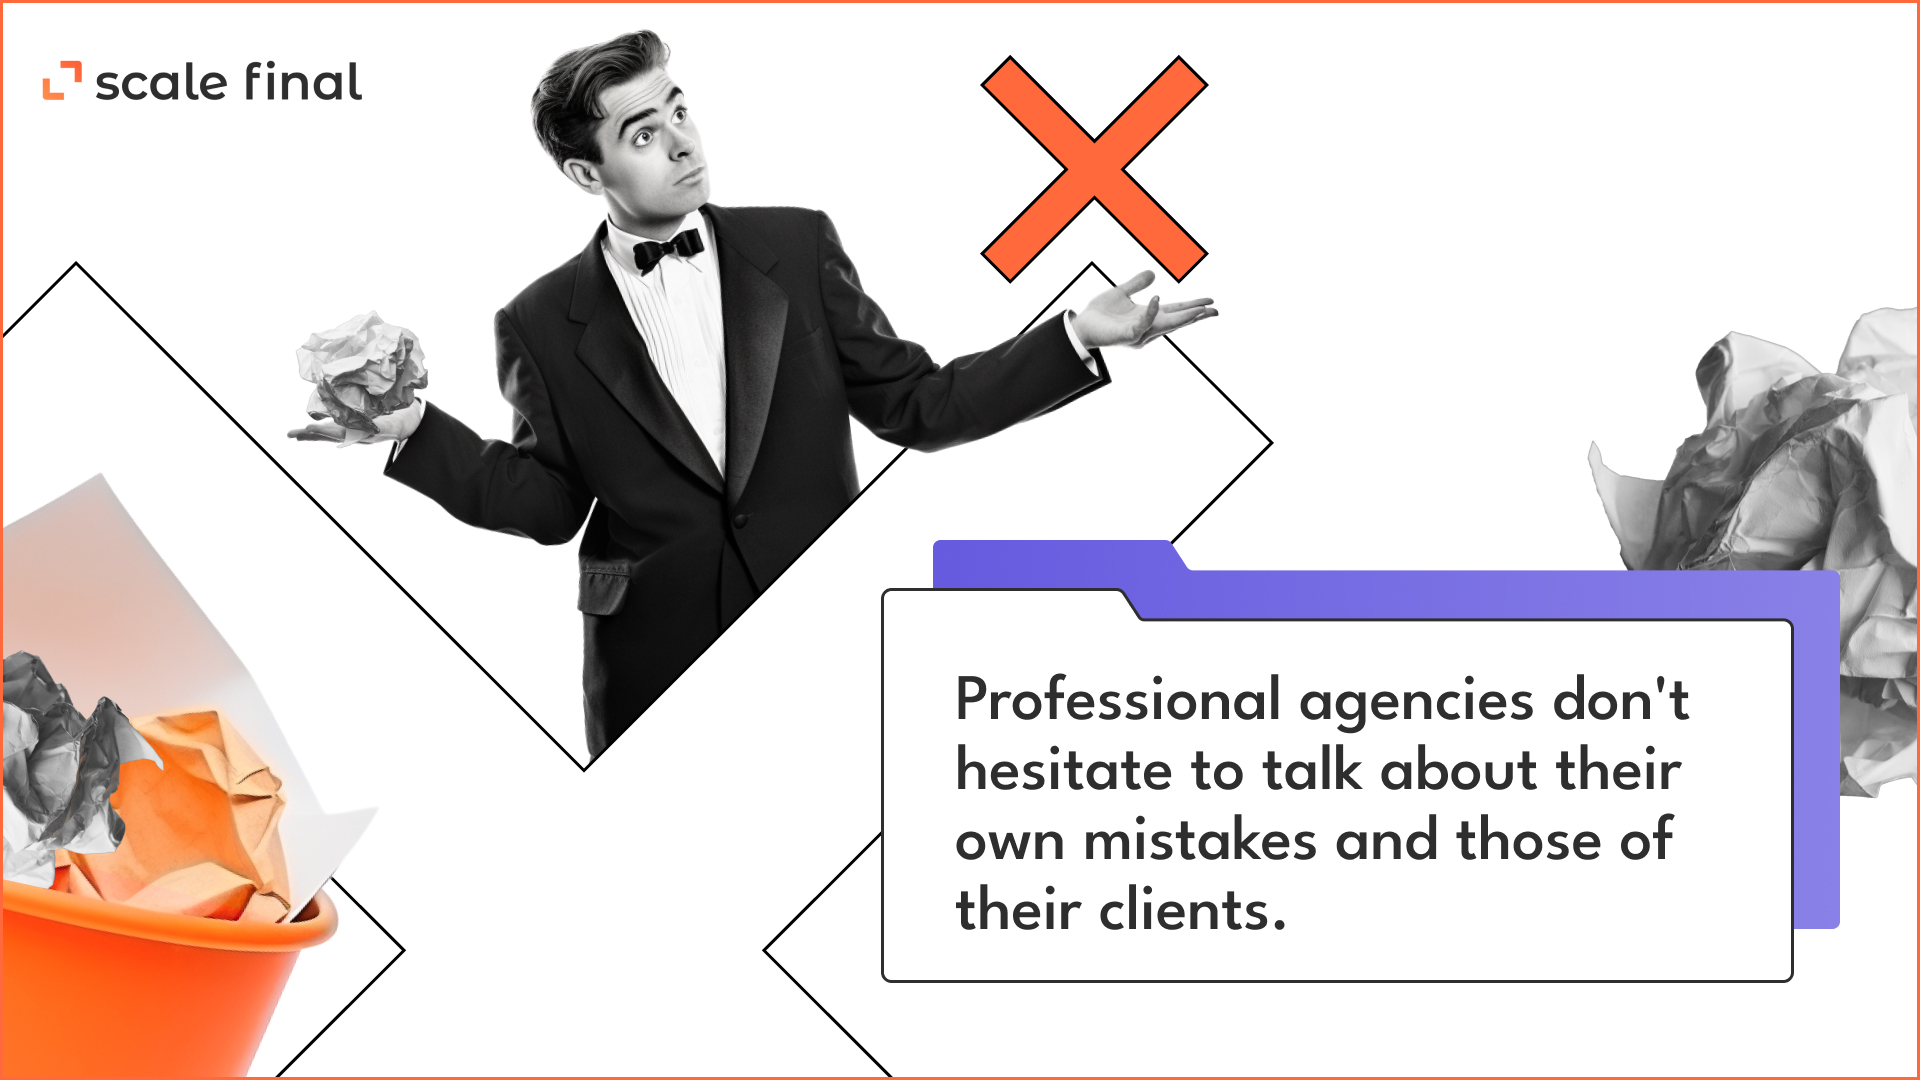 Professional agencies don't hesitate to talk about their own mistakes and those of their clients.